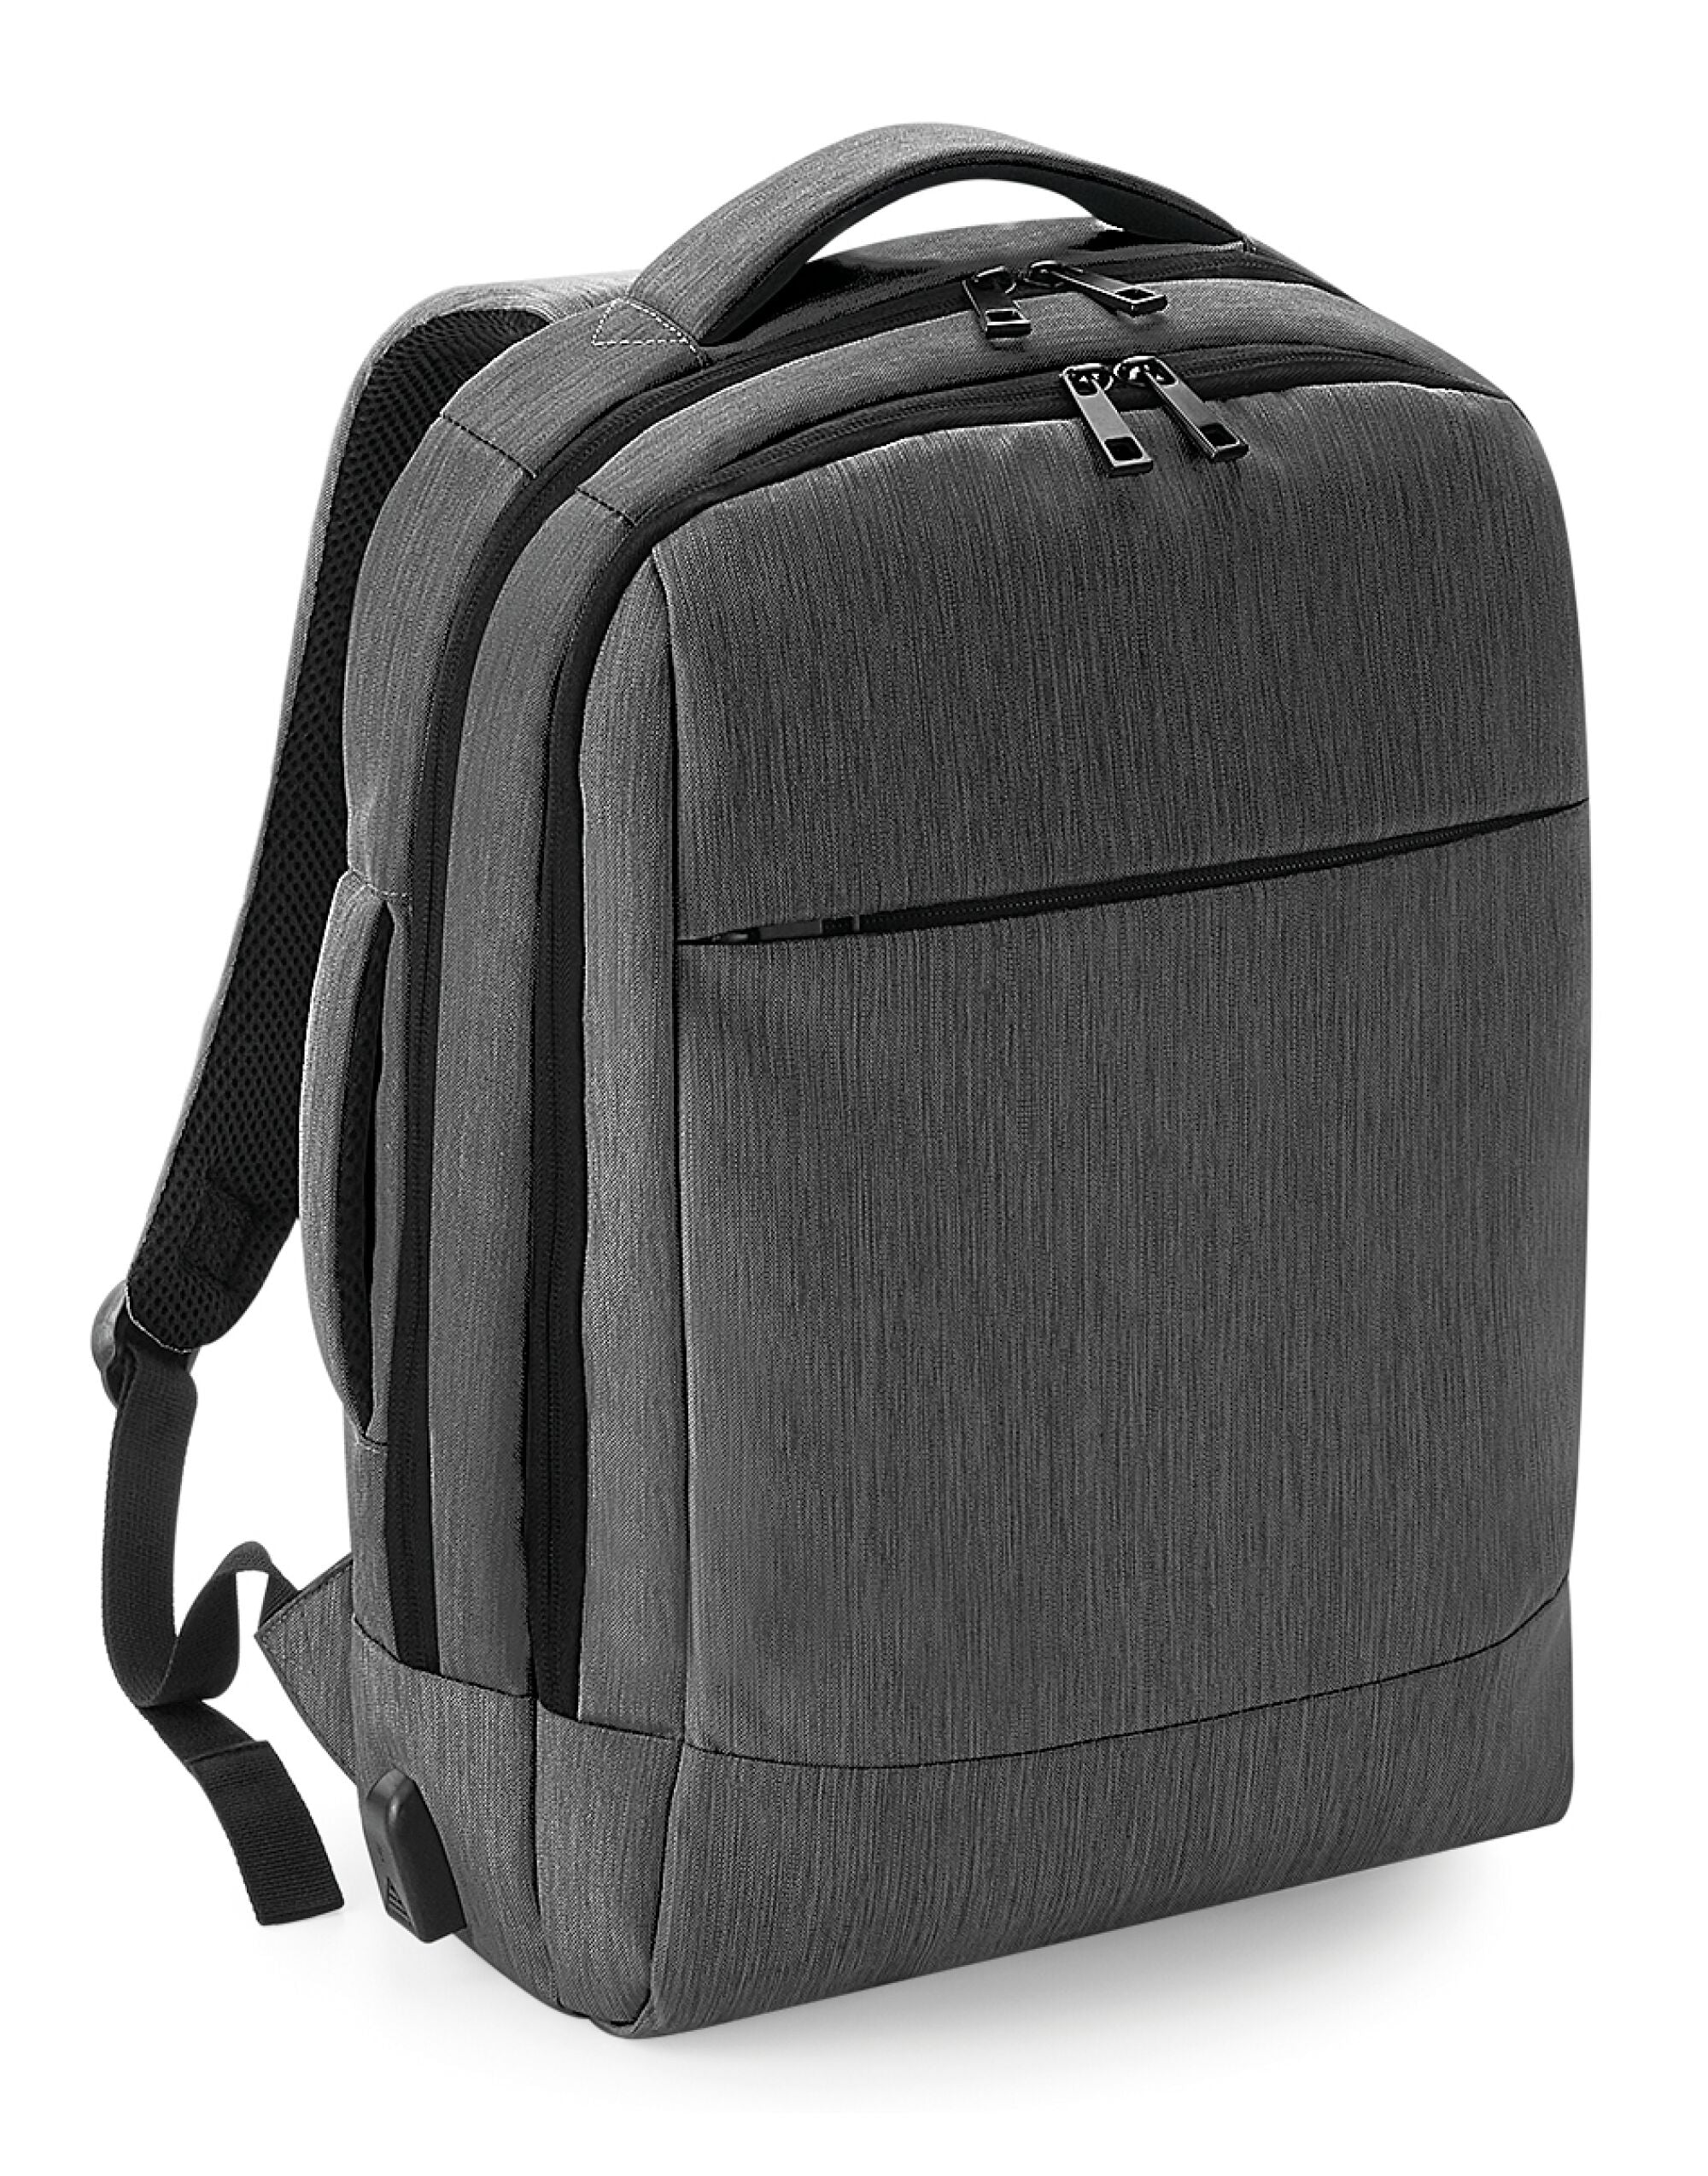 Quadra Q-Tech Charge Convertible Backpack TearAway label for ease of rebranding (QD990)